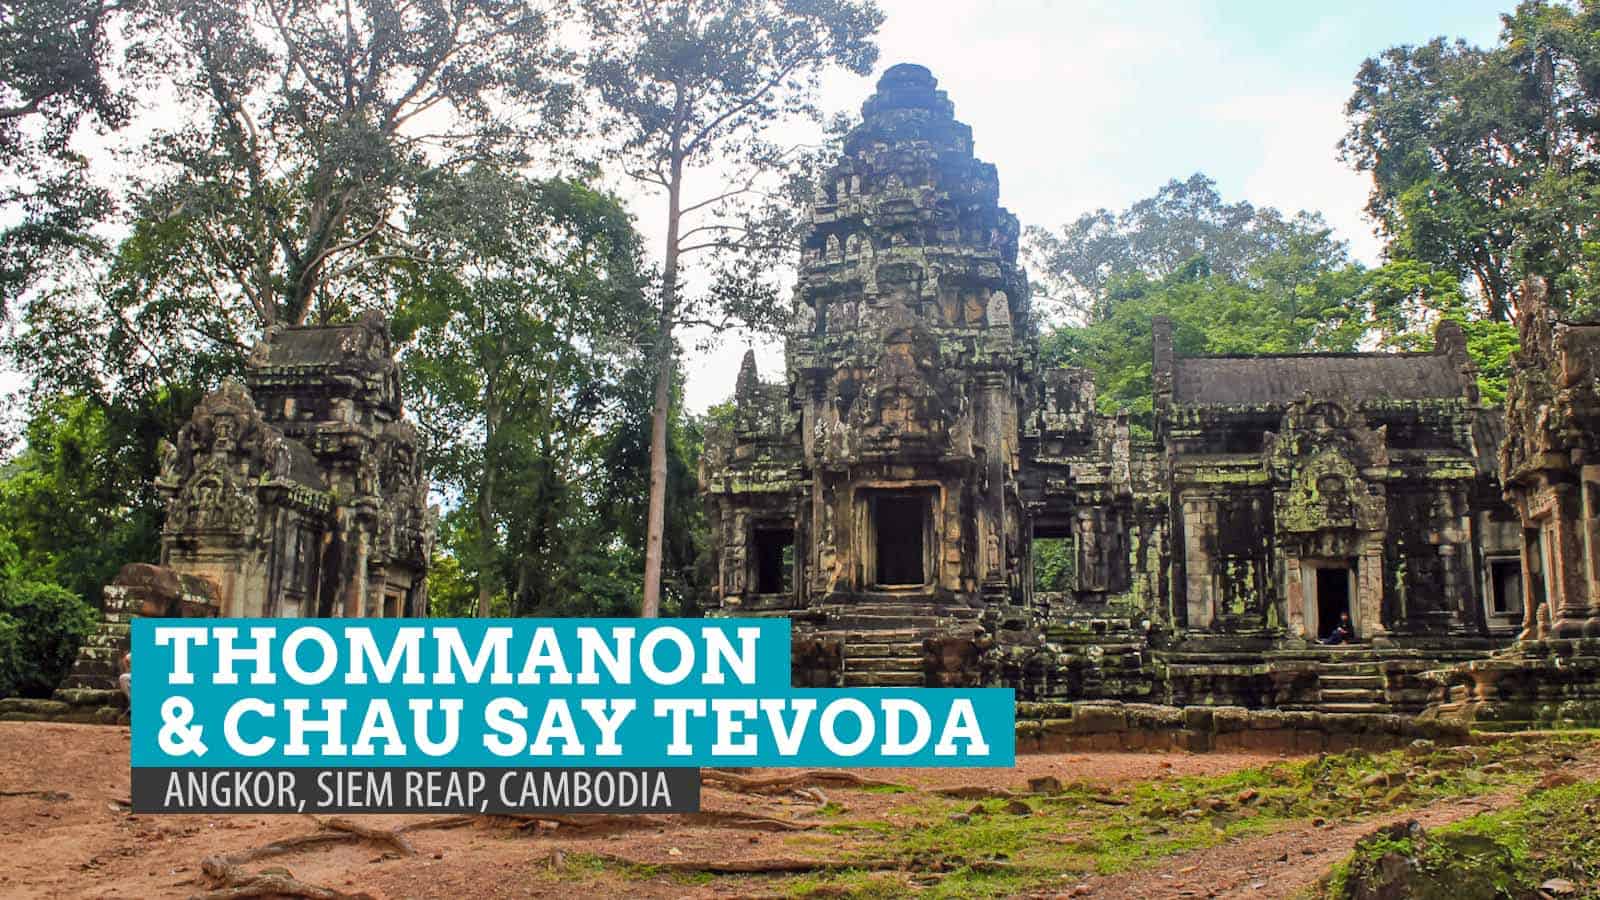 Thommanon and Chau Say Tevoda: The Twin Temples of Angkor, Cambodia